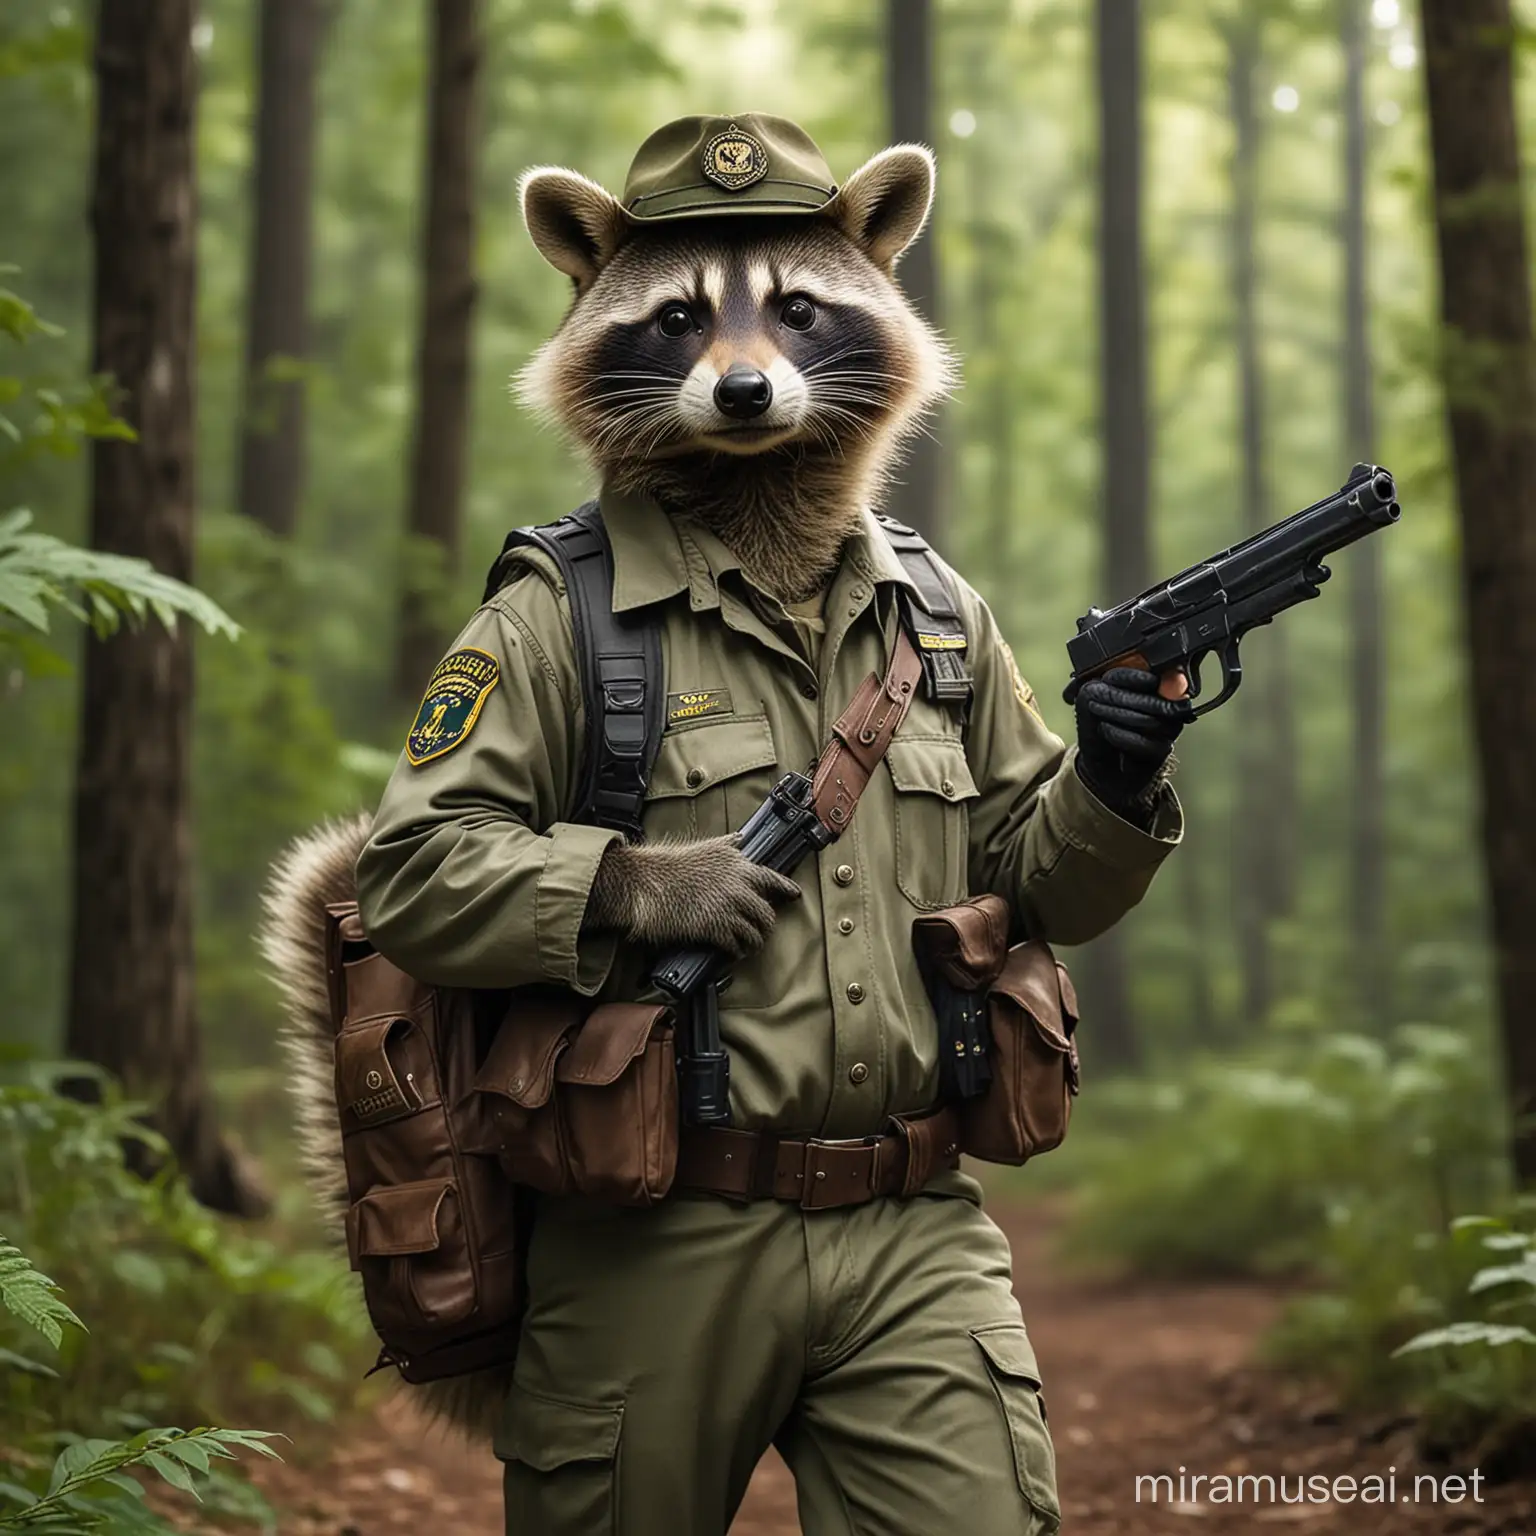 A raccoon in the forest dressed as a park ranger and carrying a handgun